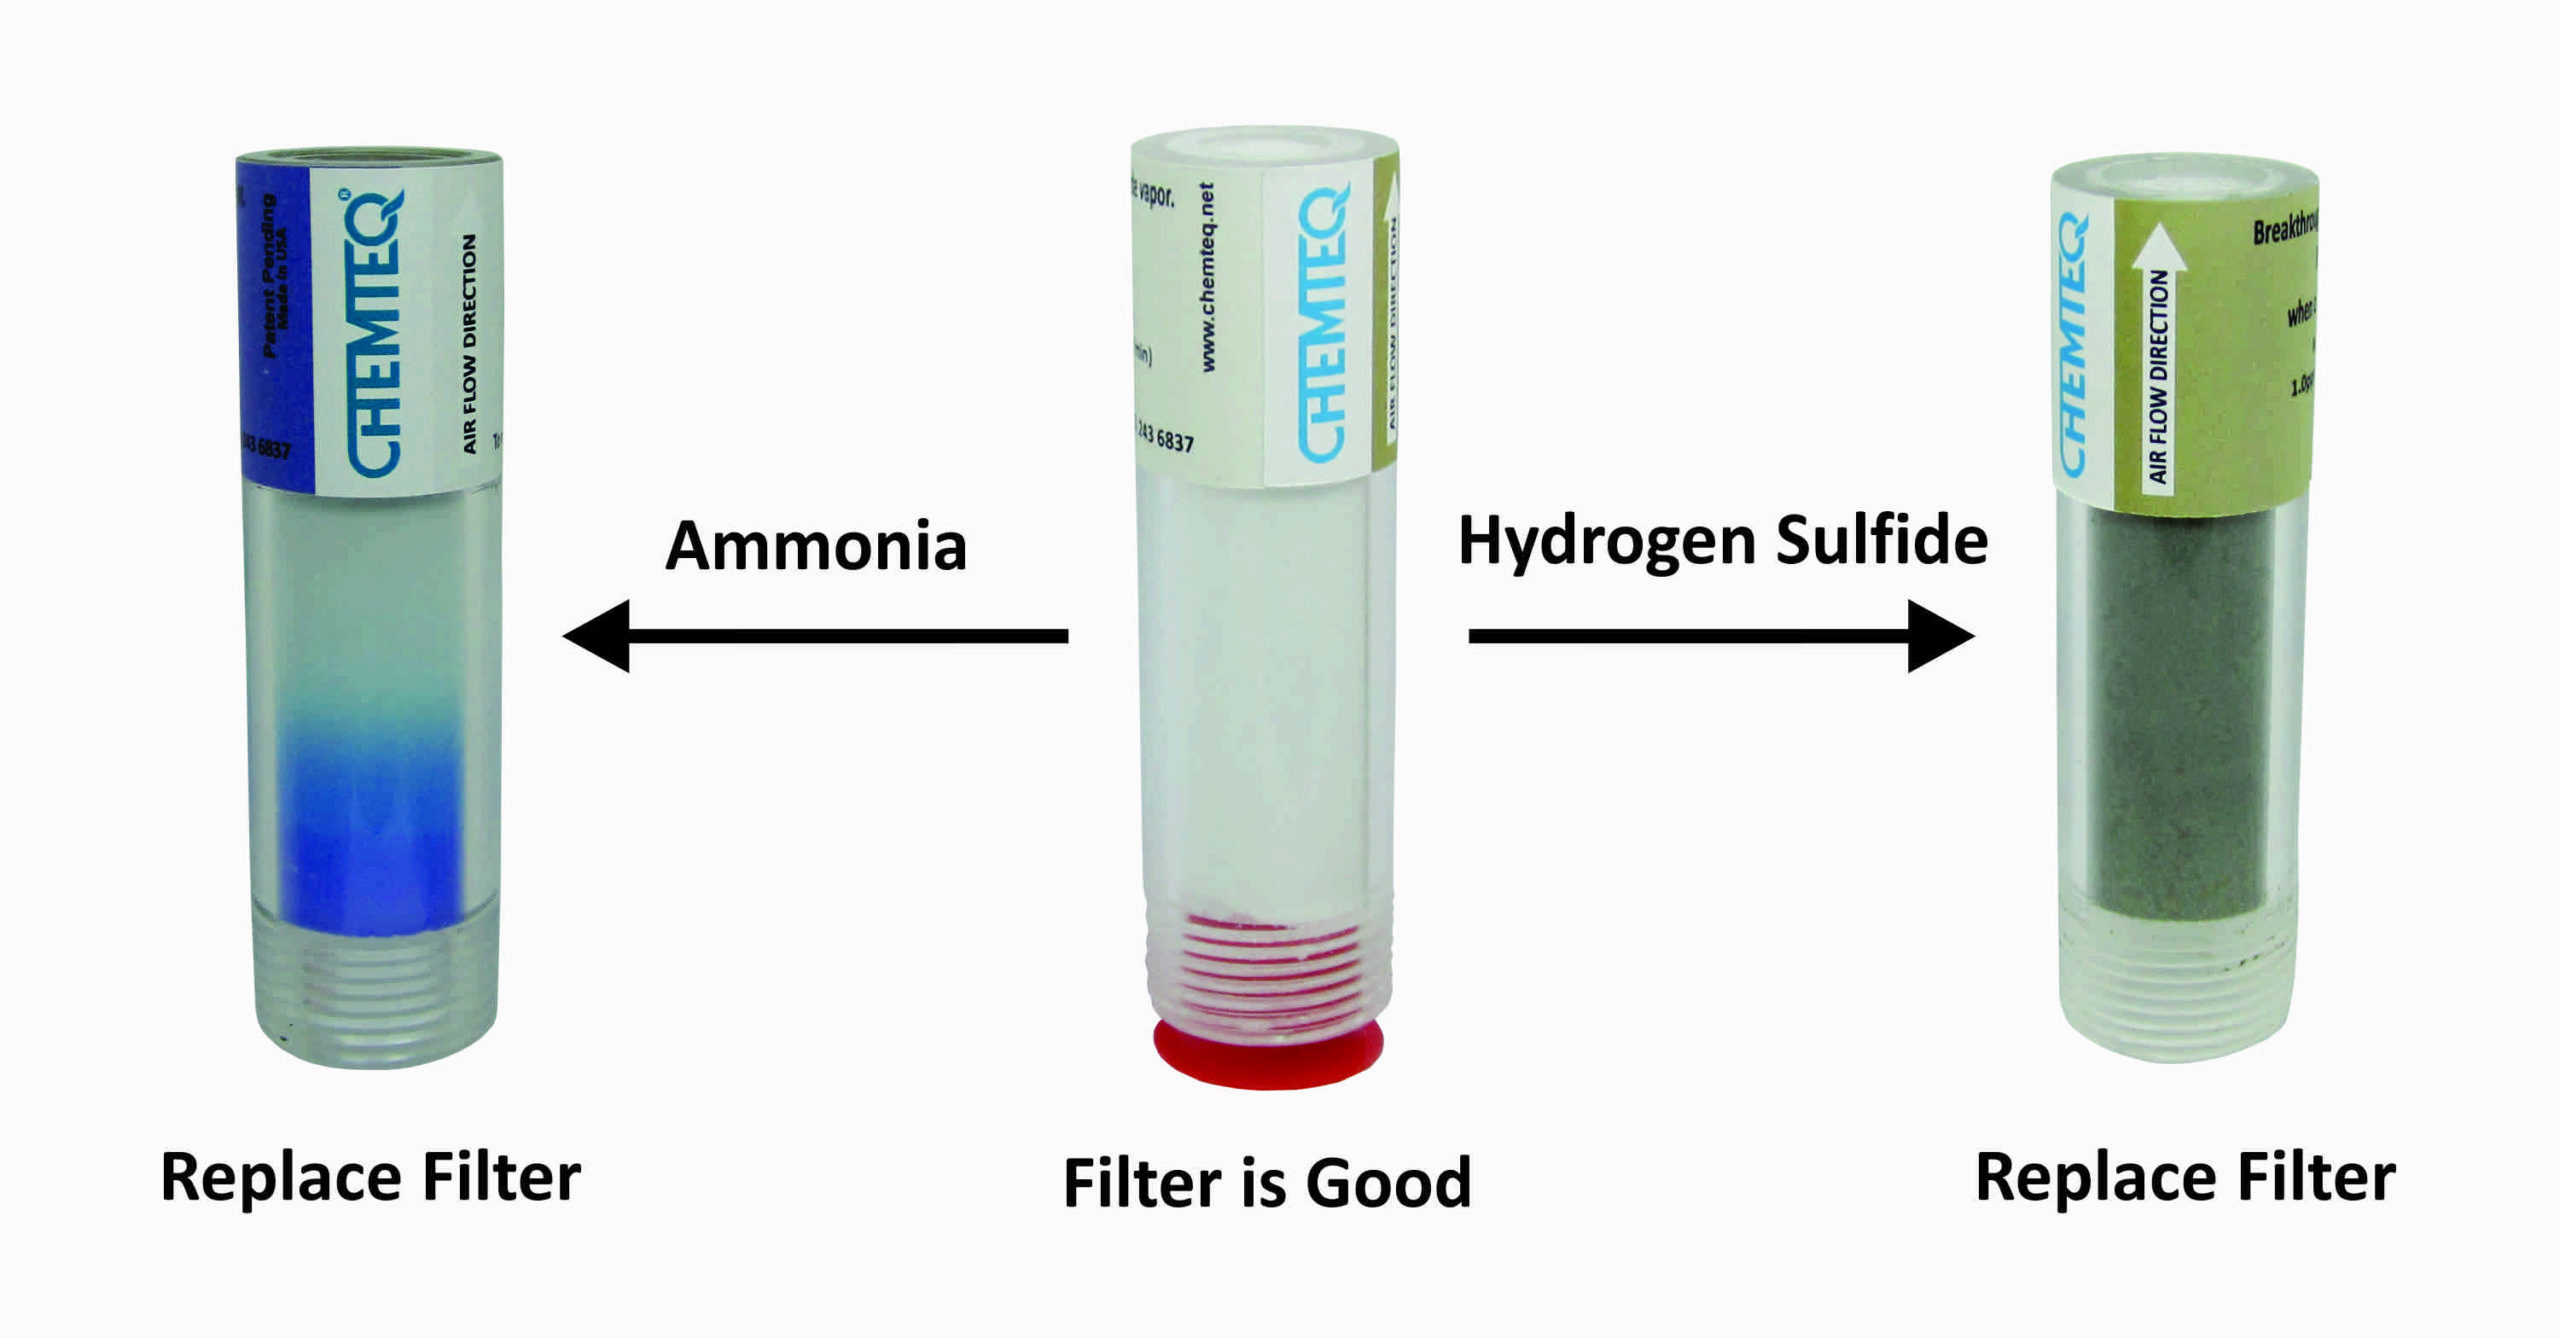 Ammonia and Hydrogen-Sulfide filter change indicator. Reliable means for protection from exposure to ammonia and hydrogen sulfide hydrogen sulfide